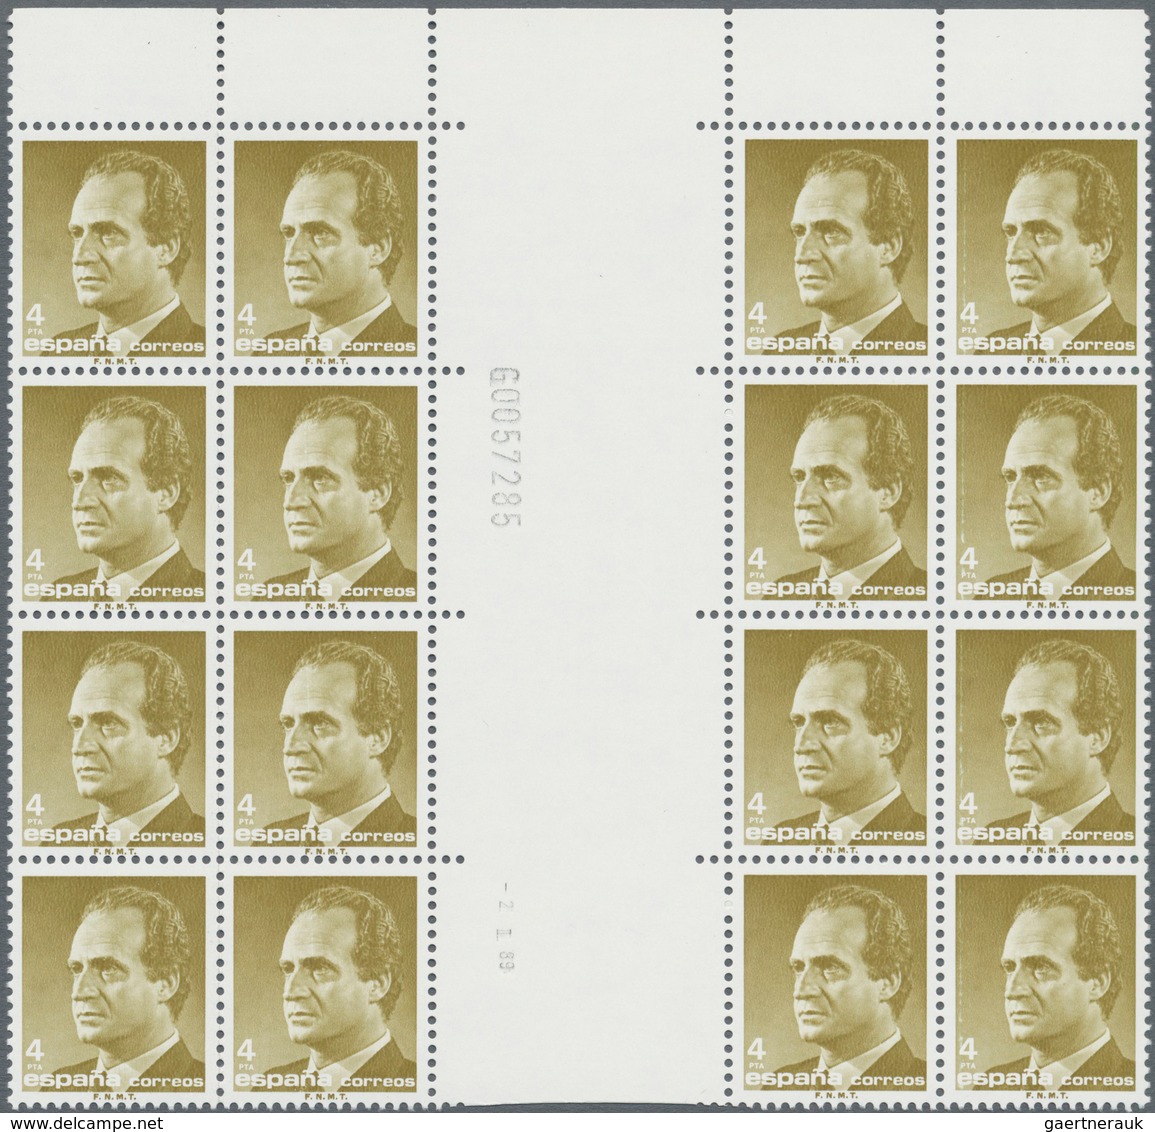 Spanien: 1986, King Juan Carlos I. 4pta. Dark Yellow Olive In A Lot With About 200 Stamps Mostly Wit - Gebruikt